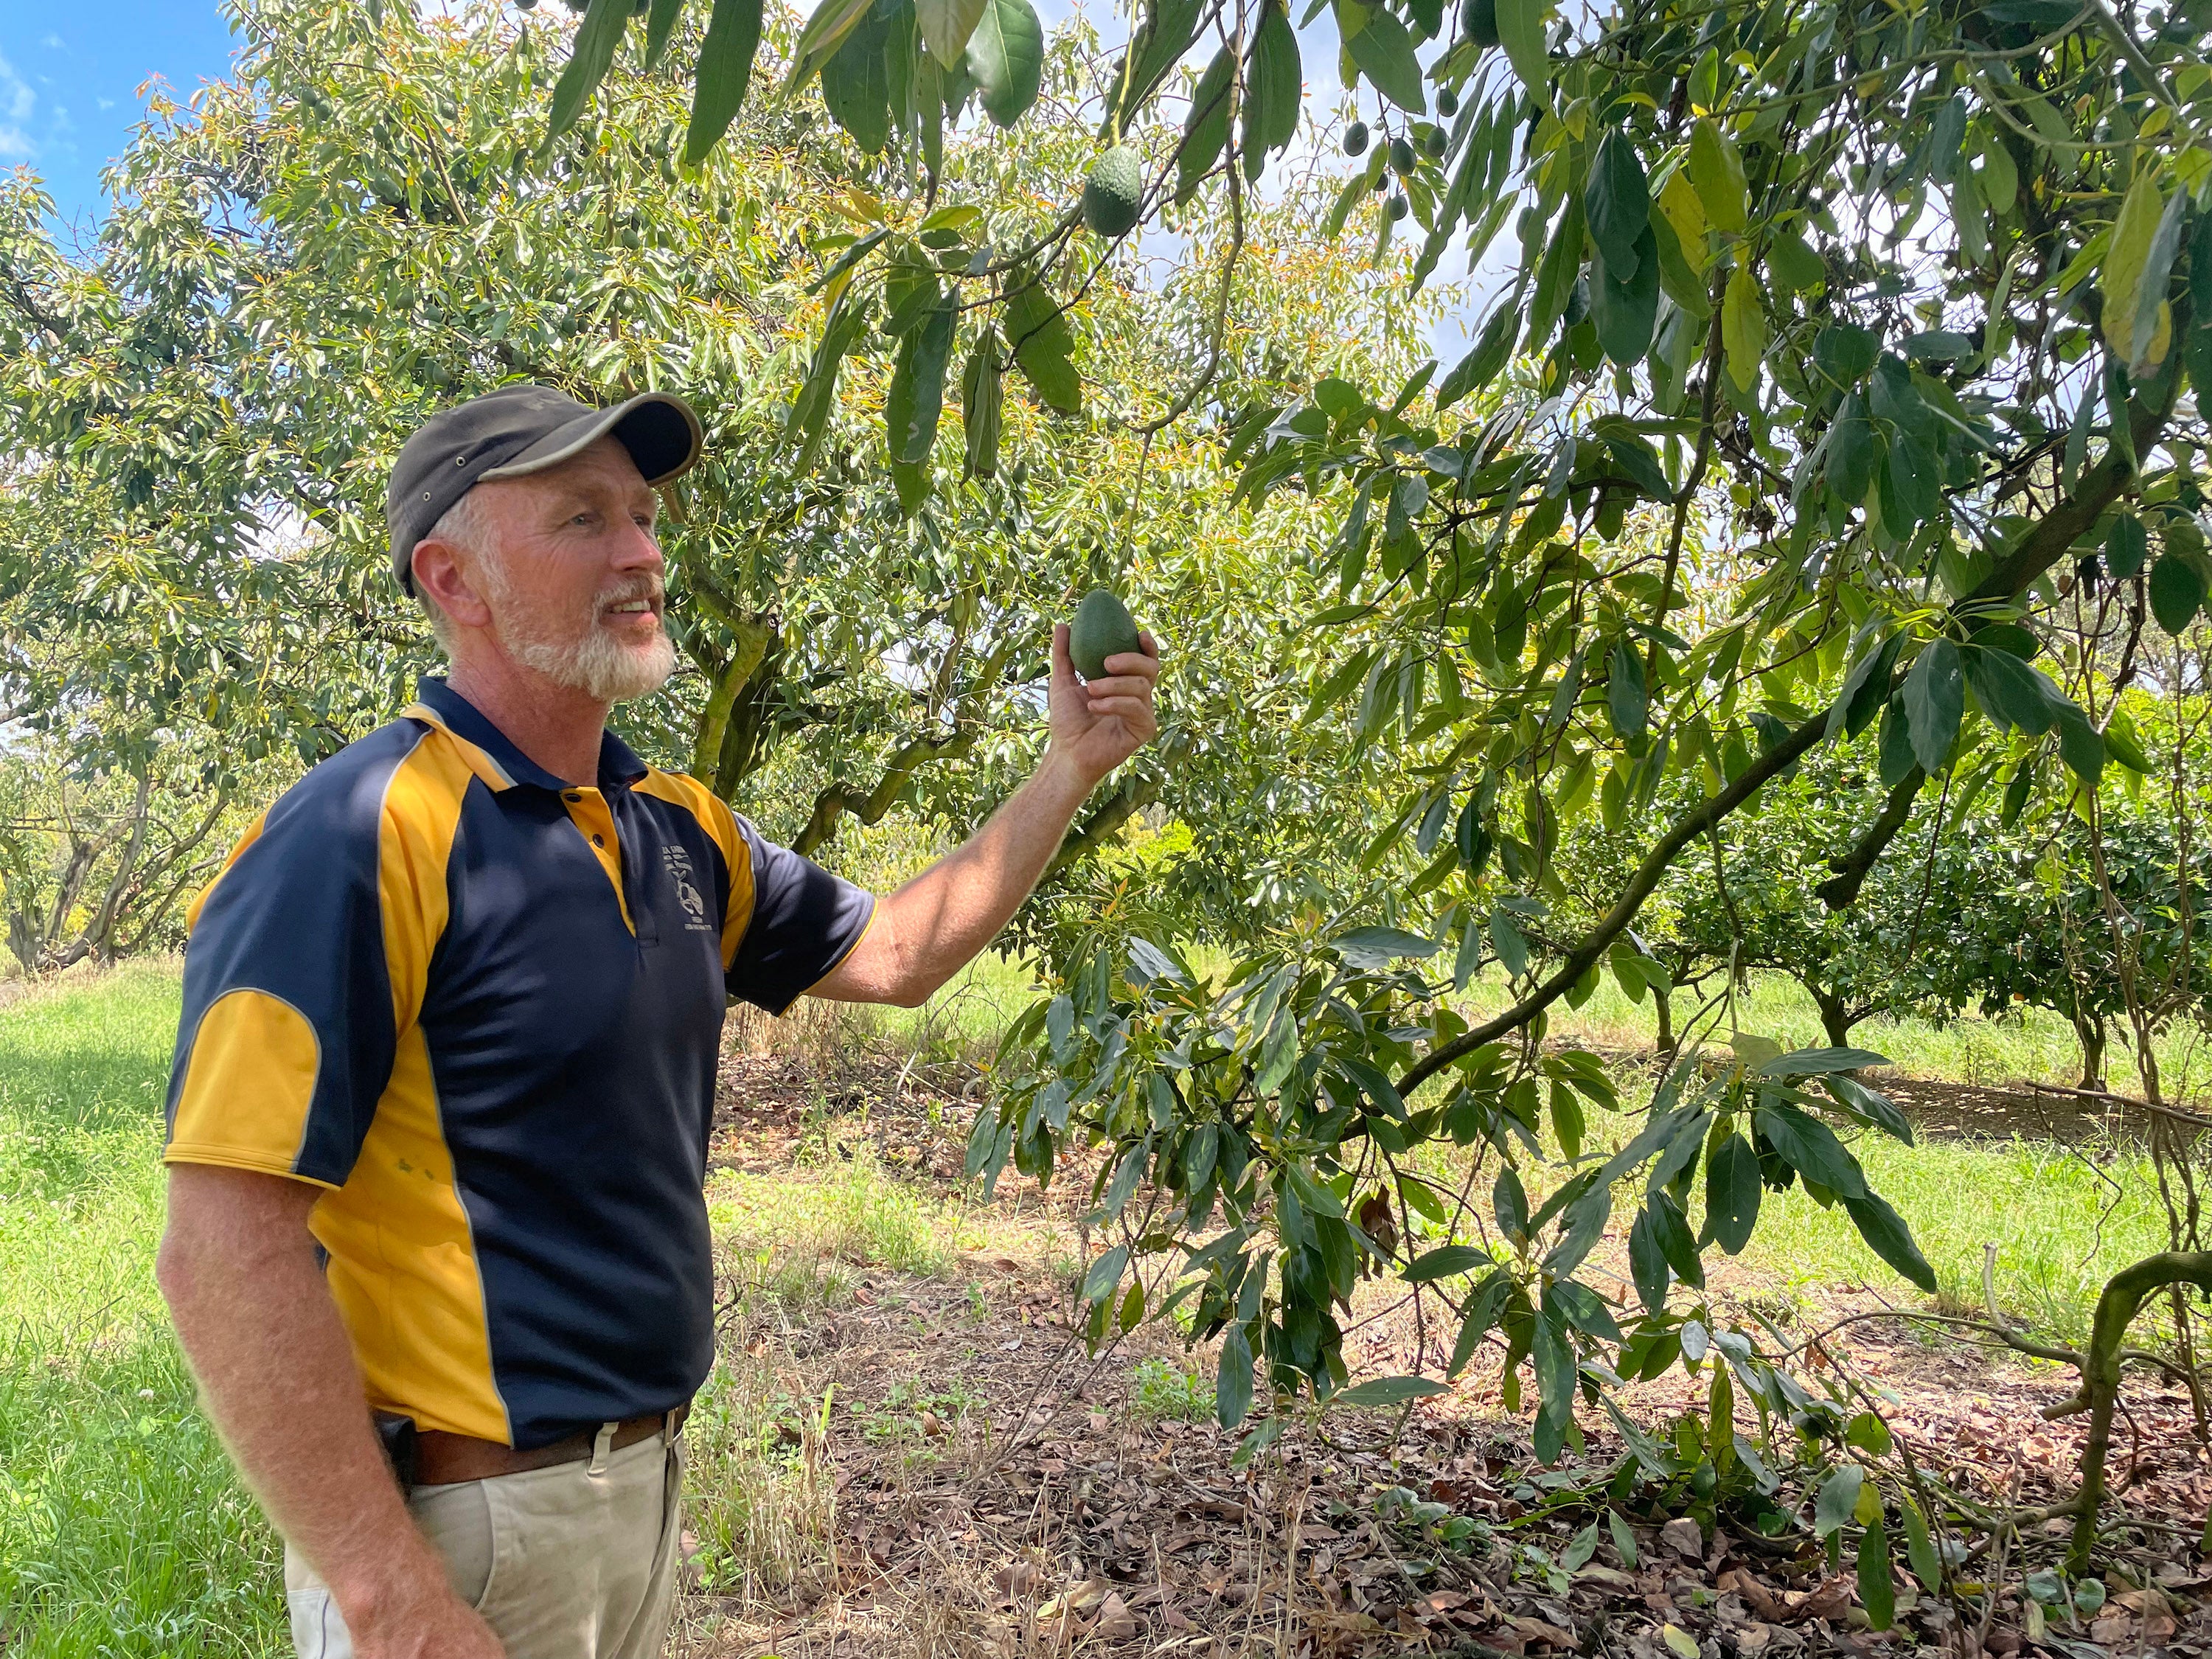 Avocado grower Tim Kemp, on his farm near Sydney, explains that he’s ‘basically selling avocados for less than the cost of production’